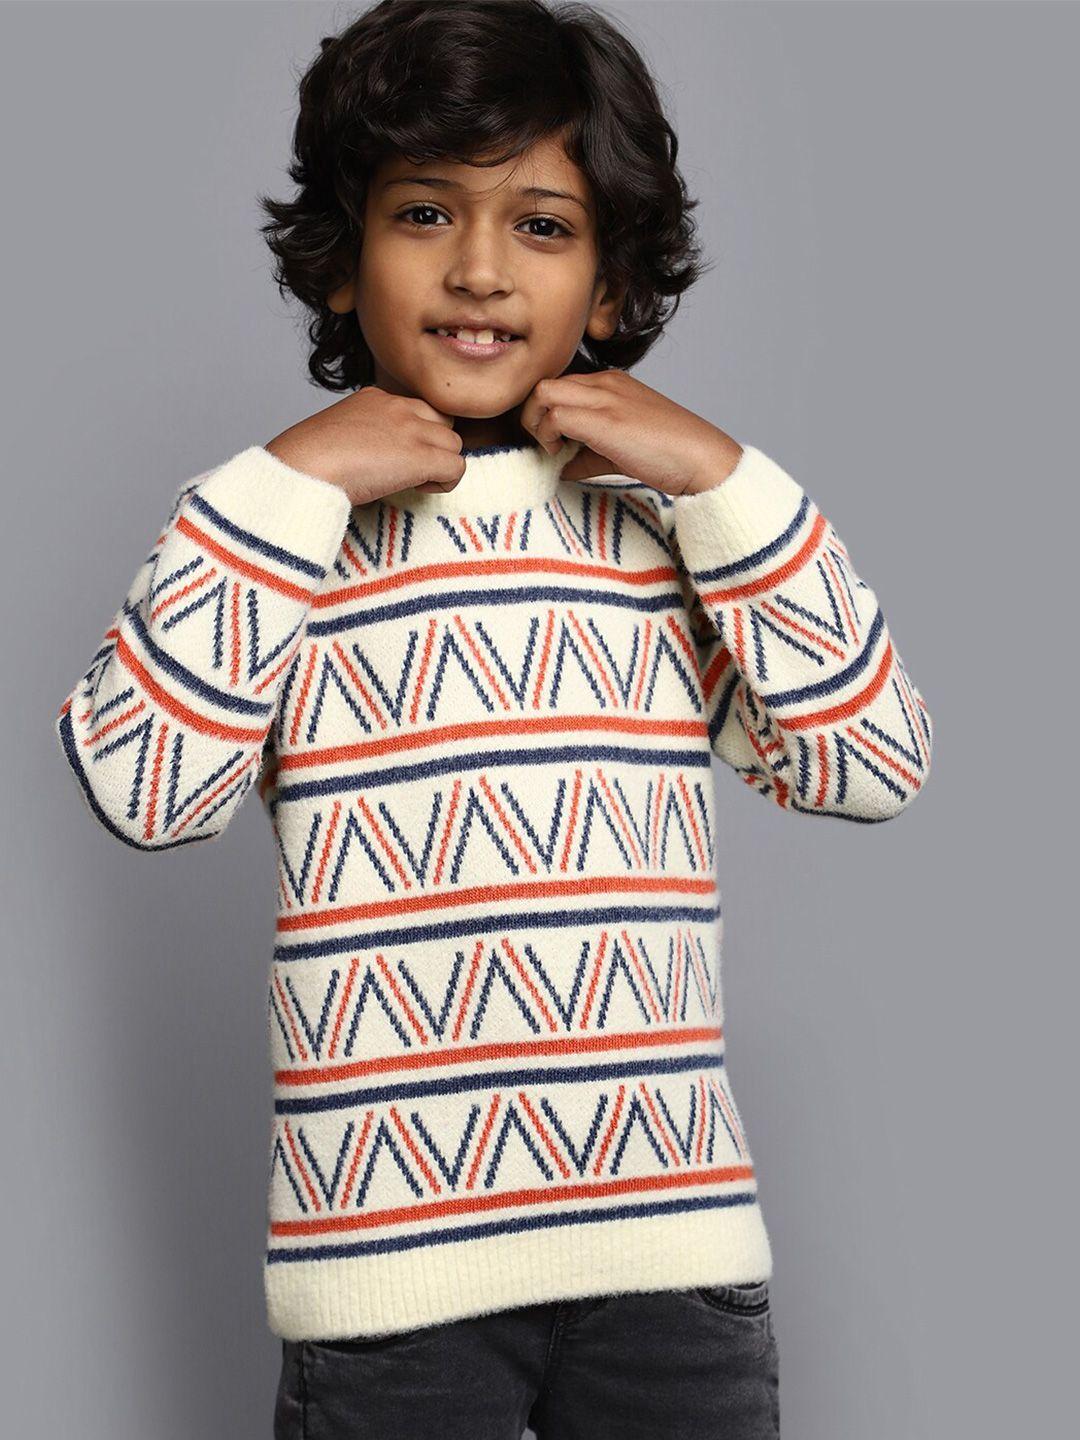 v-mart boys geometric printed long sleeves pullover sweater